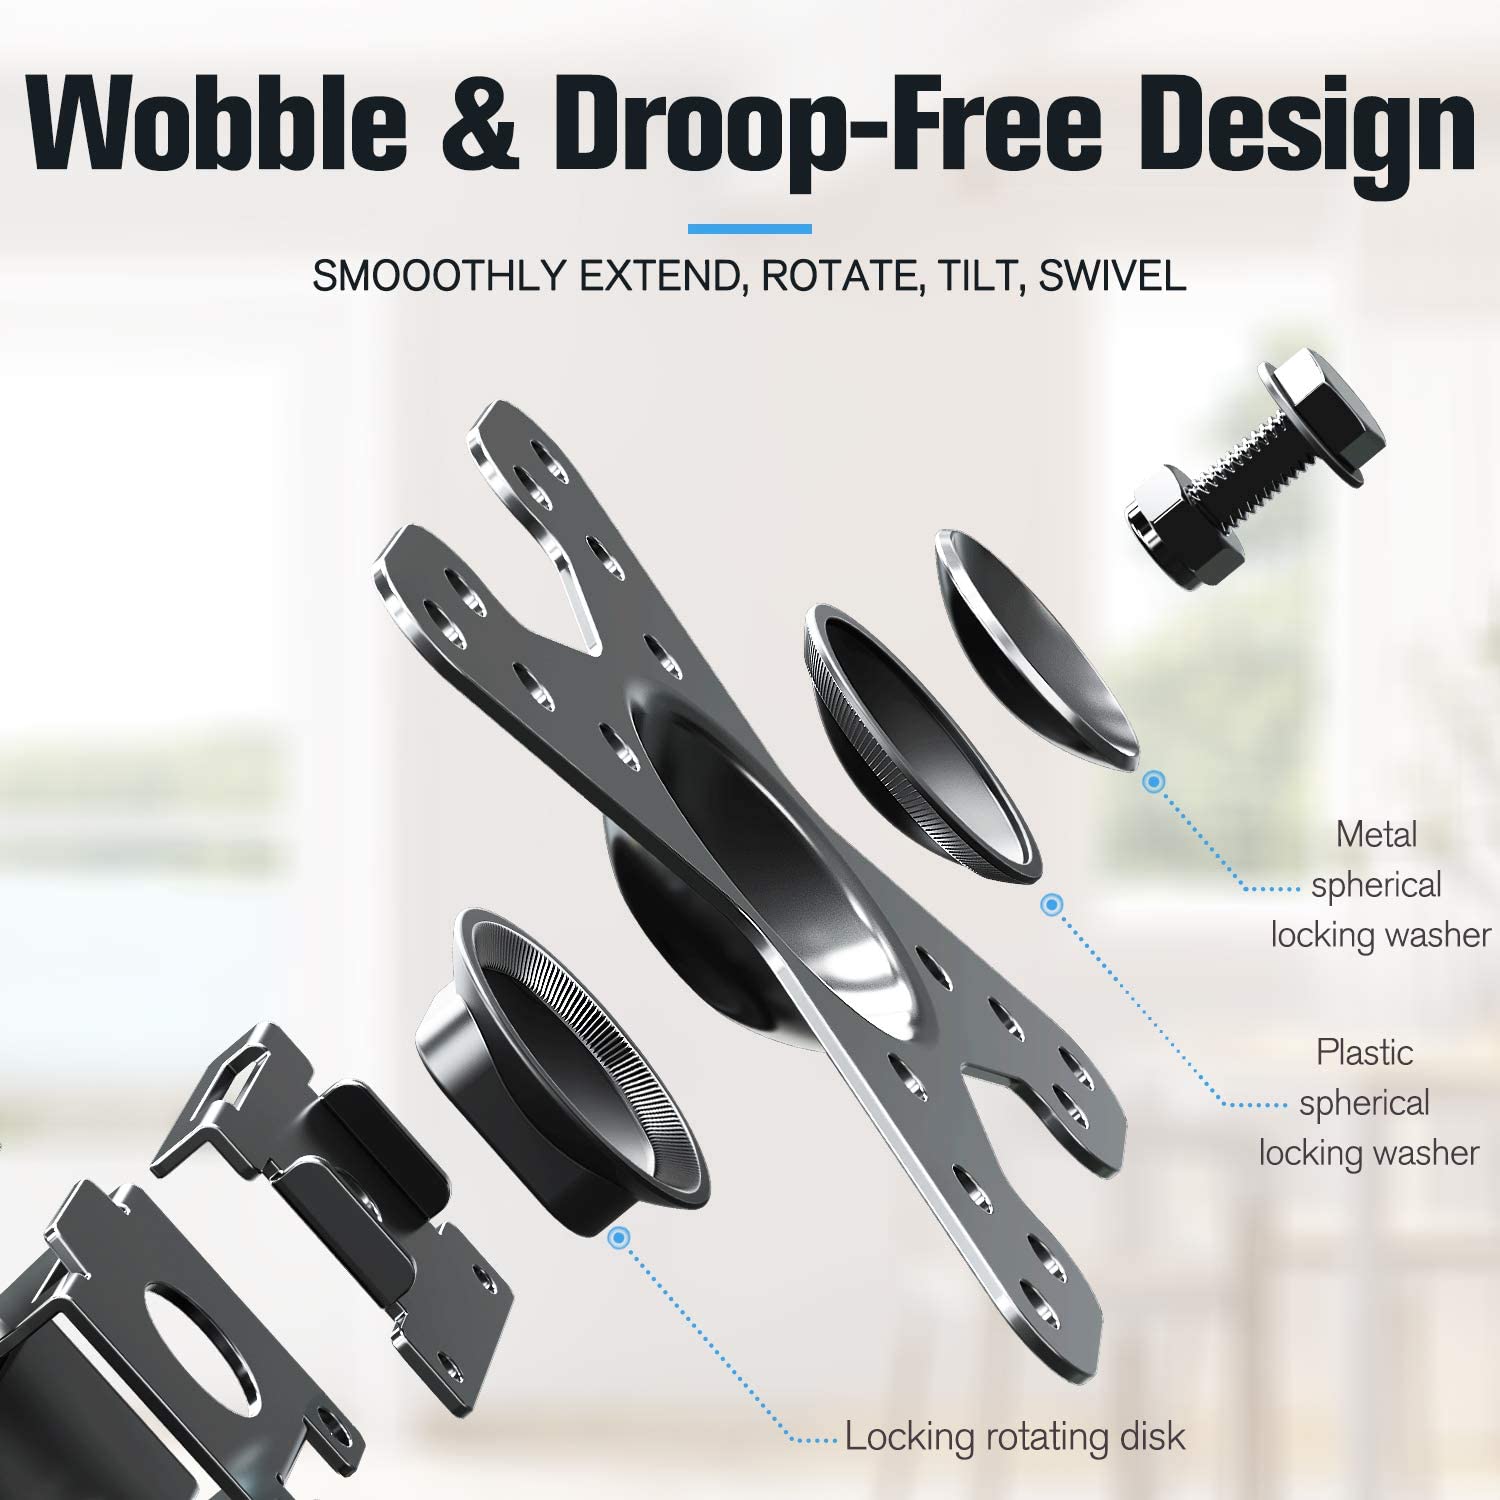 droop-free design allows the TV to smoothly extend, rotate, tilt, and swivel